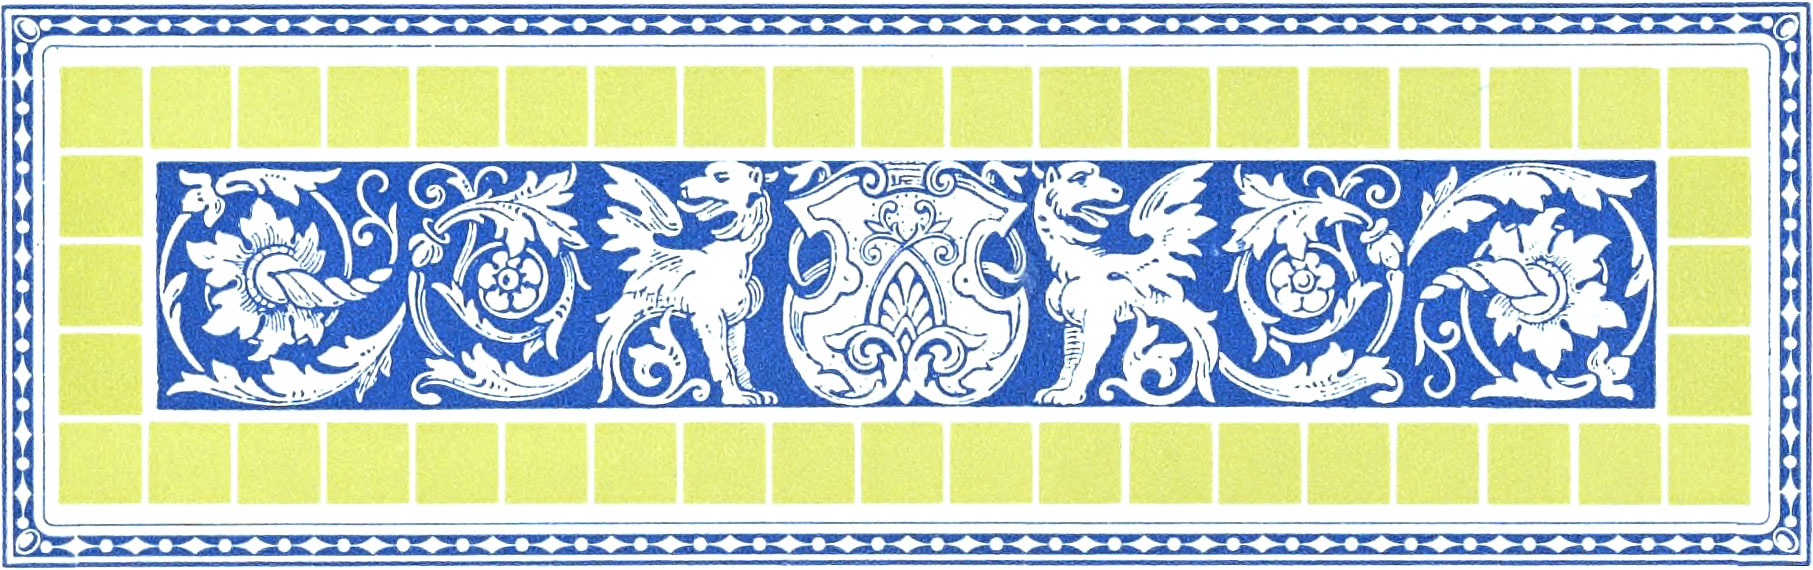 Ornate blue horizontal graphic of griffins, a crest, and floral filigree bordered by light green tiles and a blue border